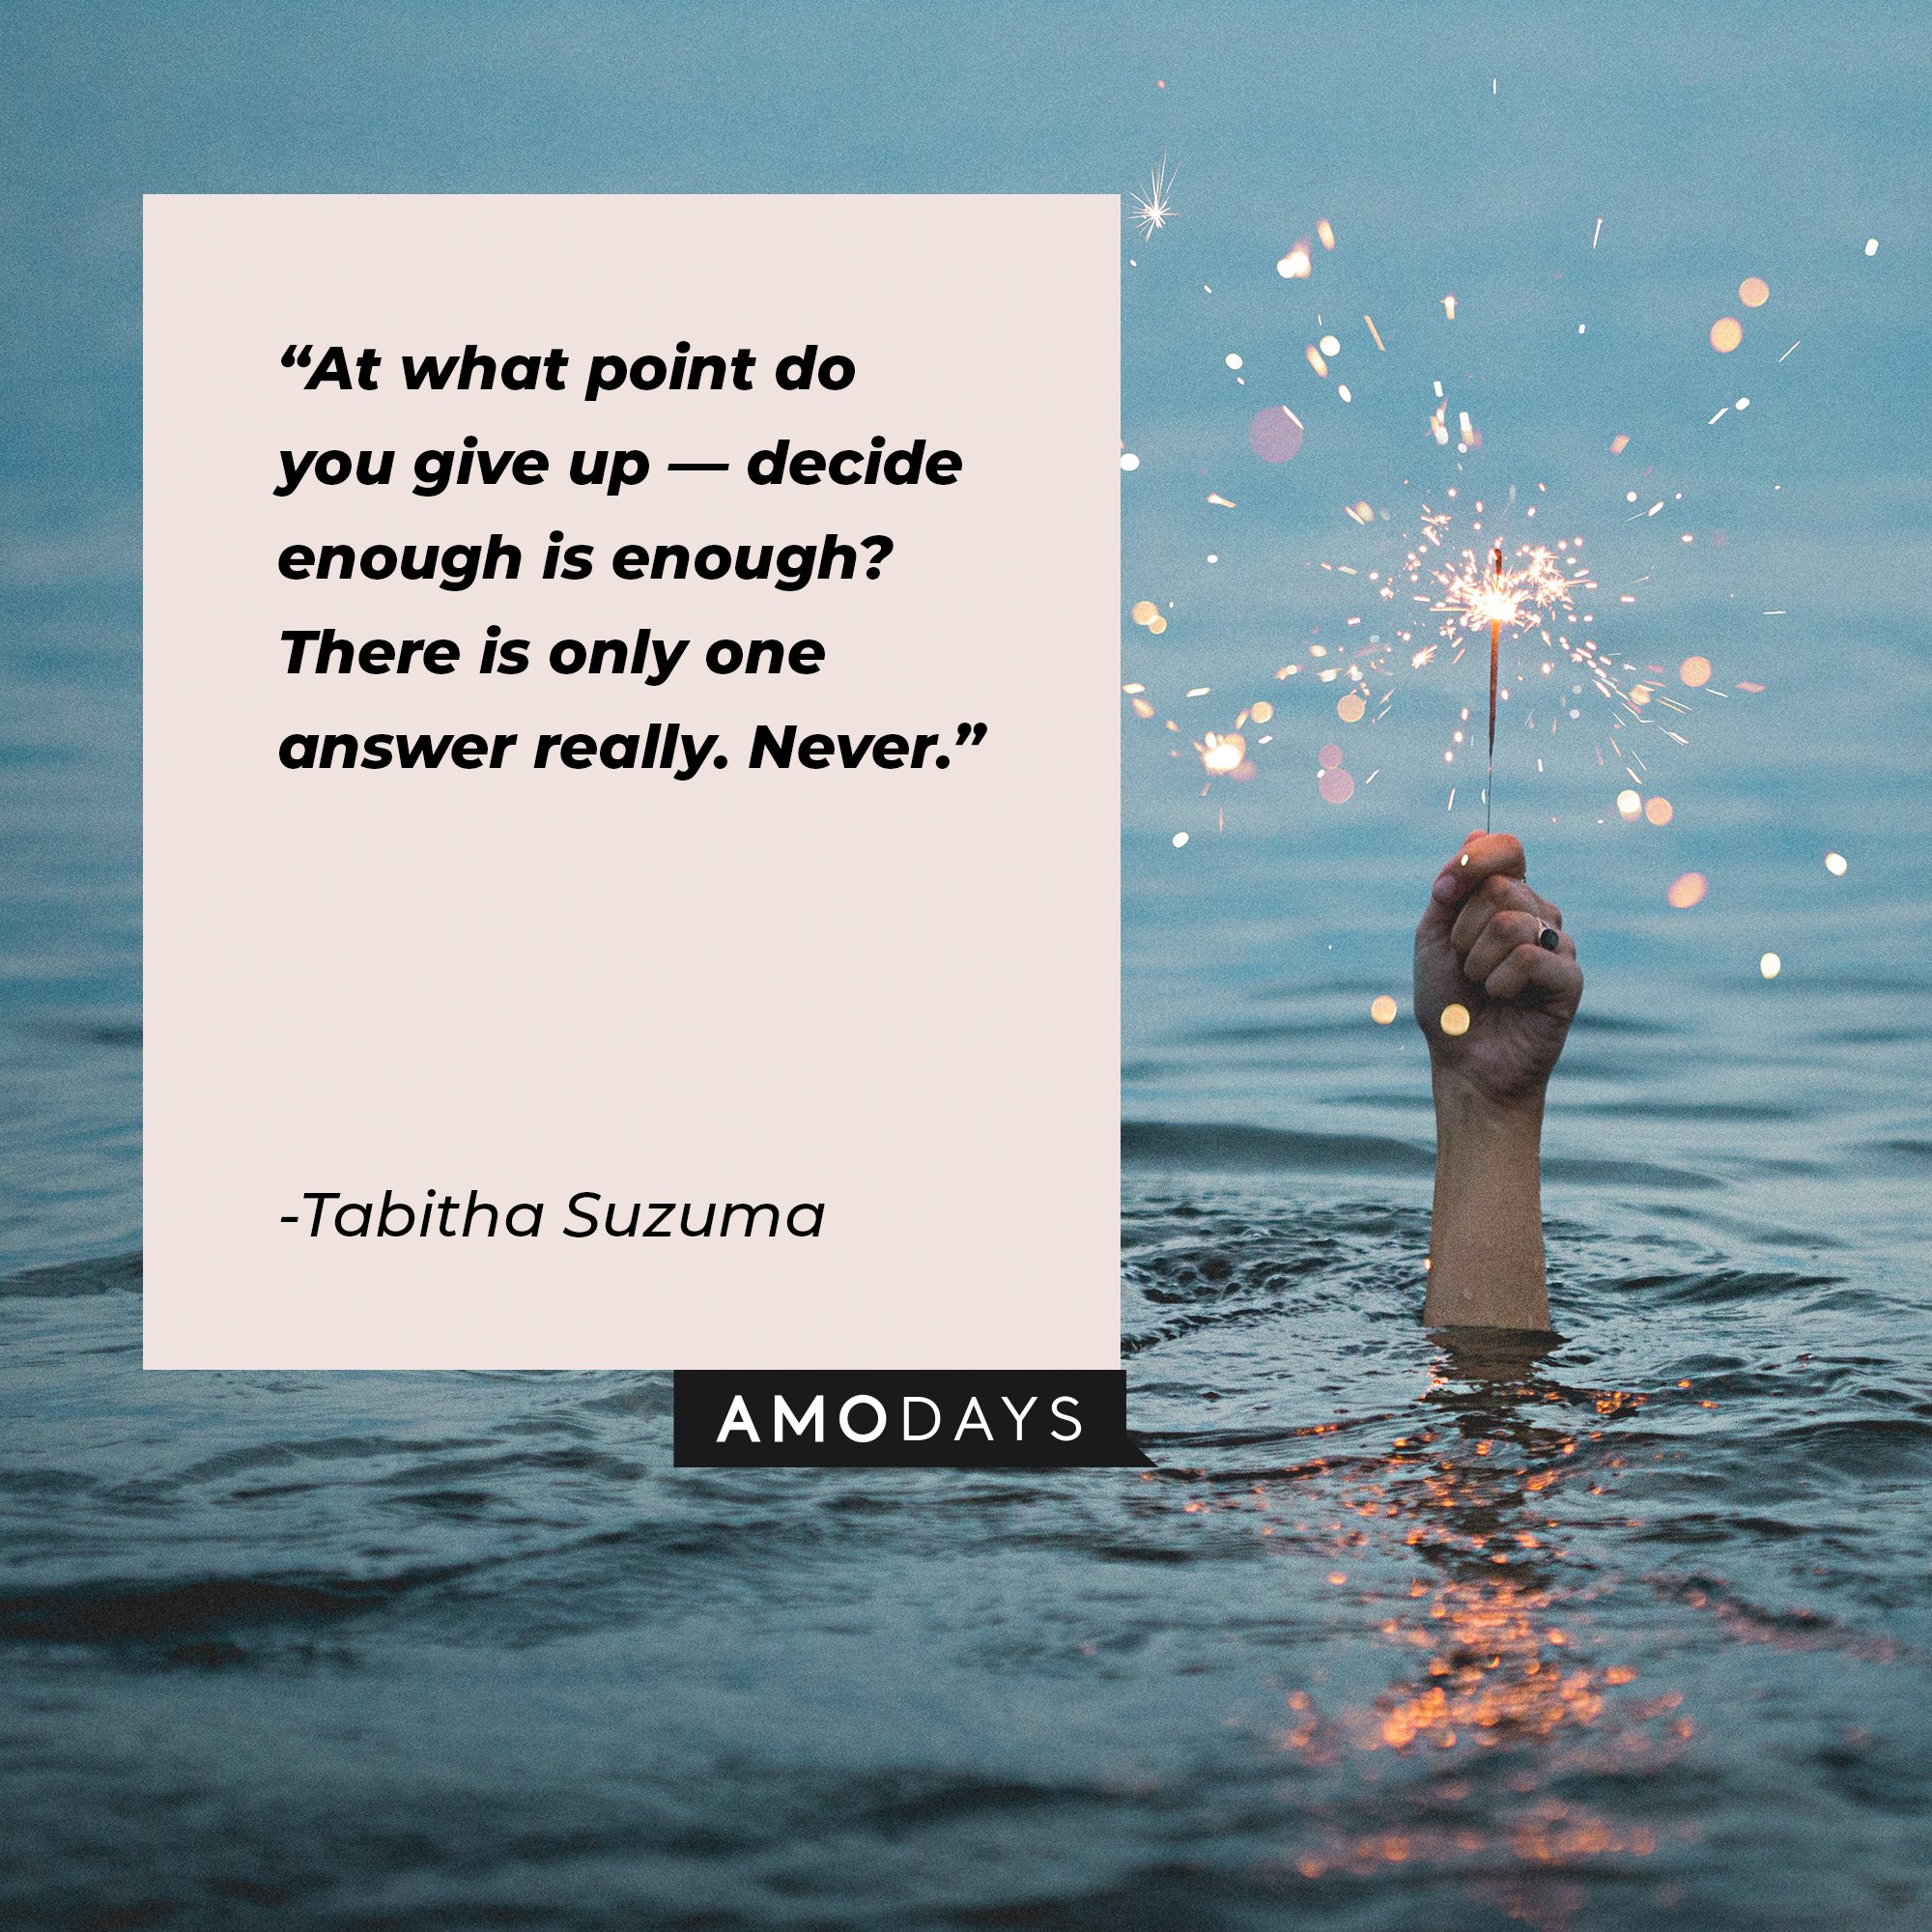 Tabitha Suzuma’s quote: “At what point do you give up—decide enough is enough? There is only one answer really. Never.” | Image: AmoDays 